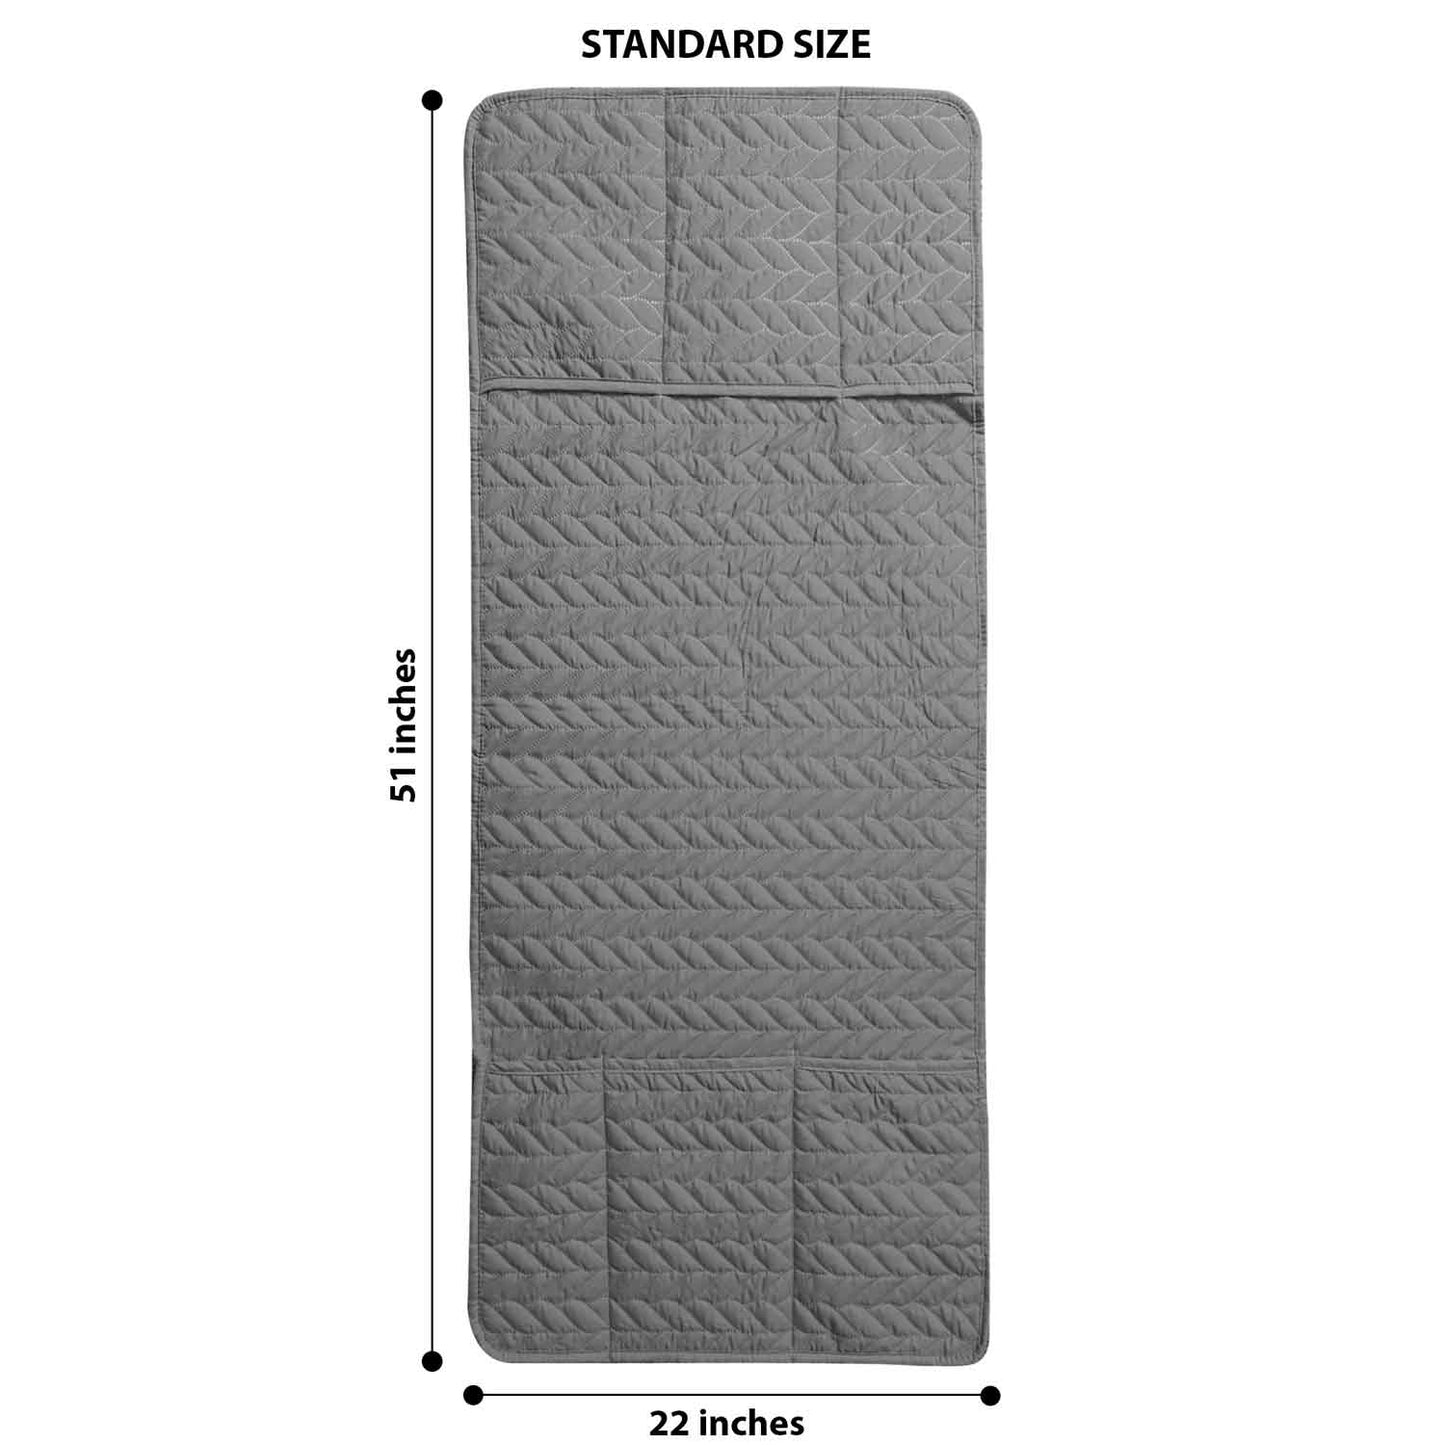 Dustproof Quilted Refrigerator Cover With Side Pockets-Grey